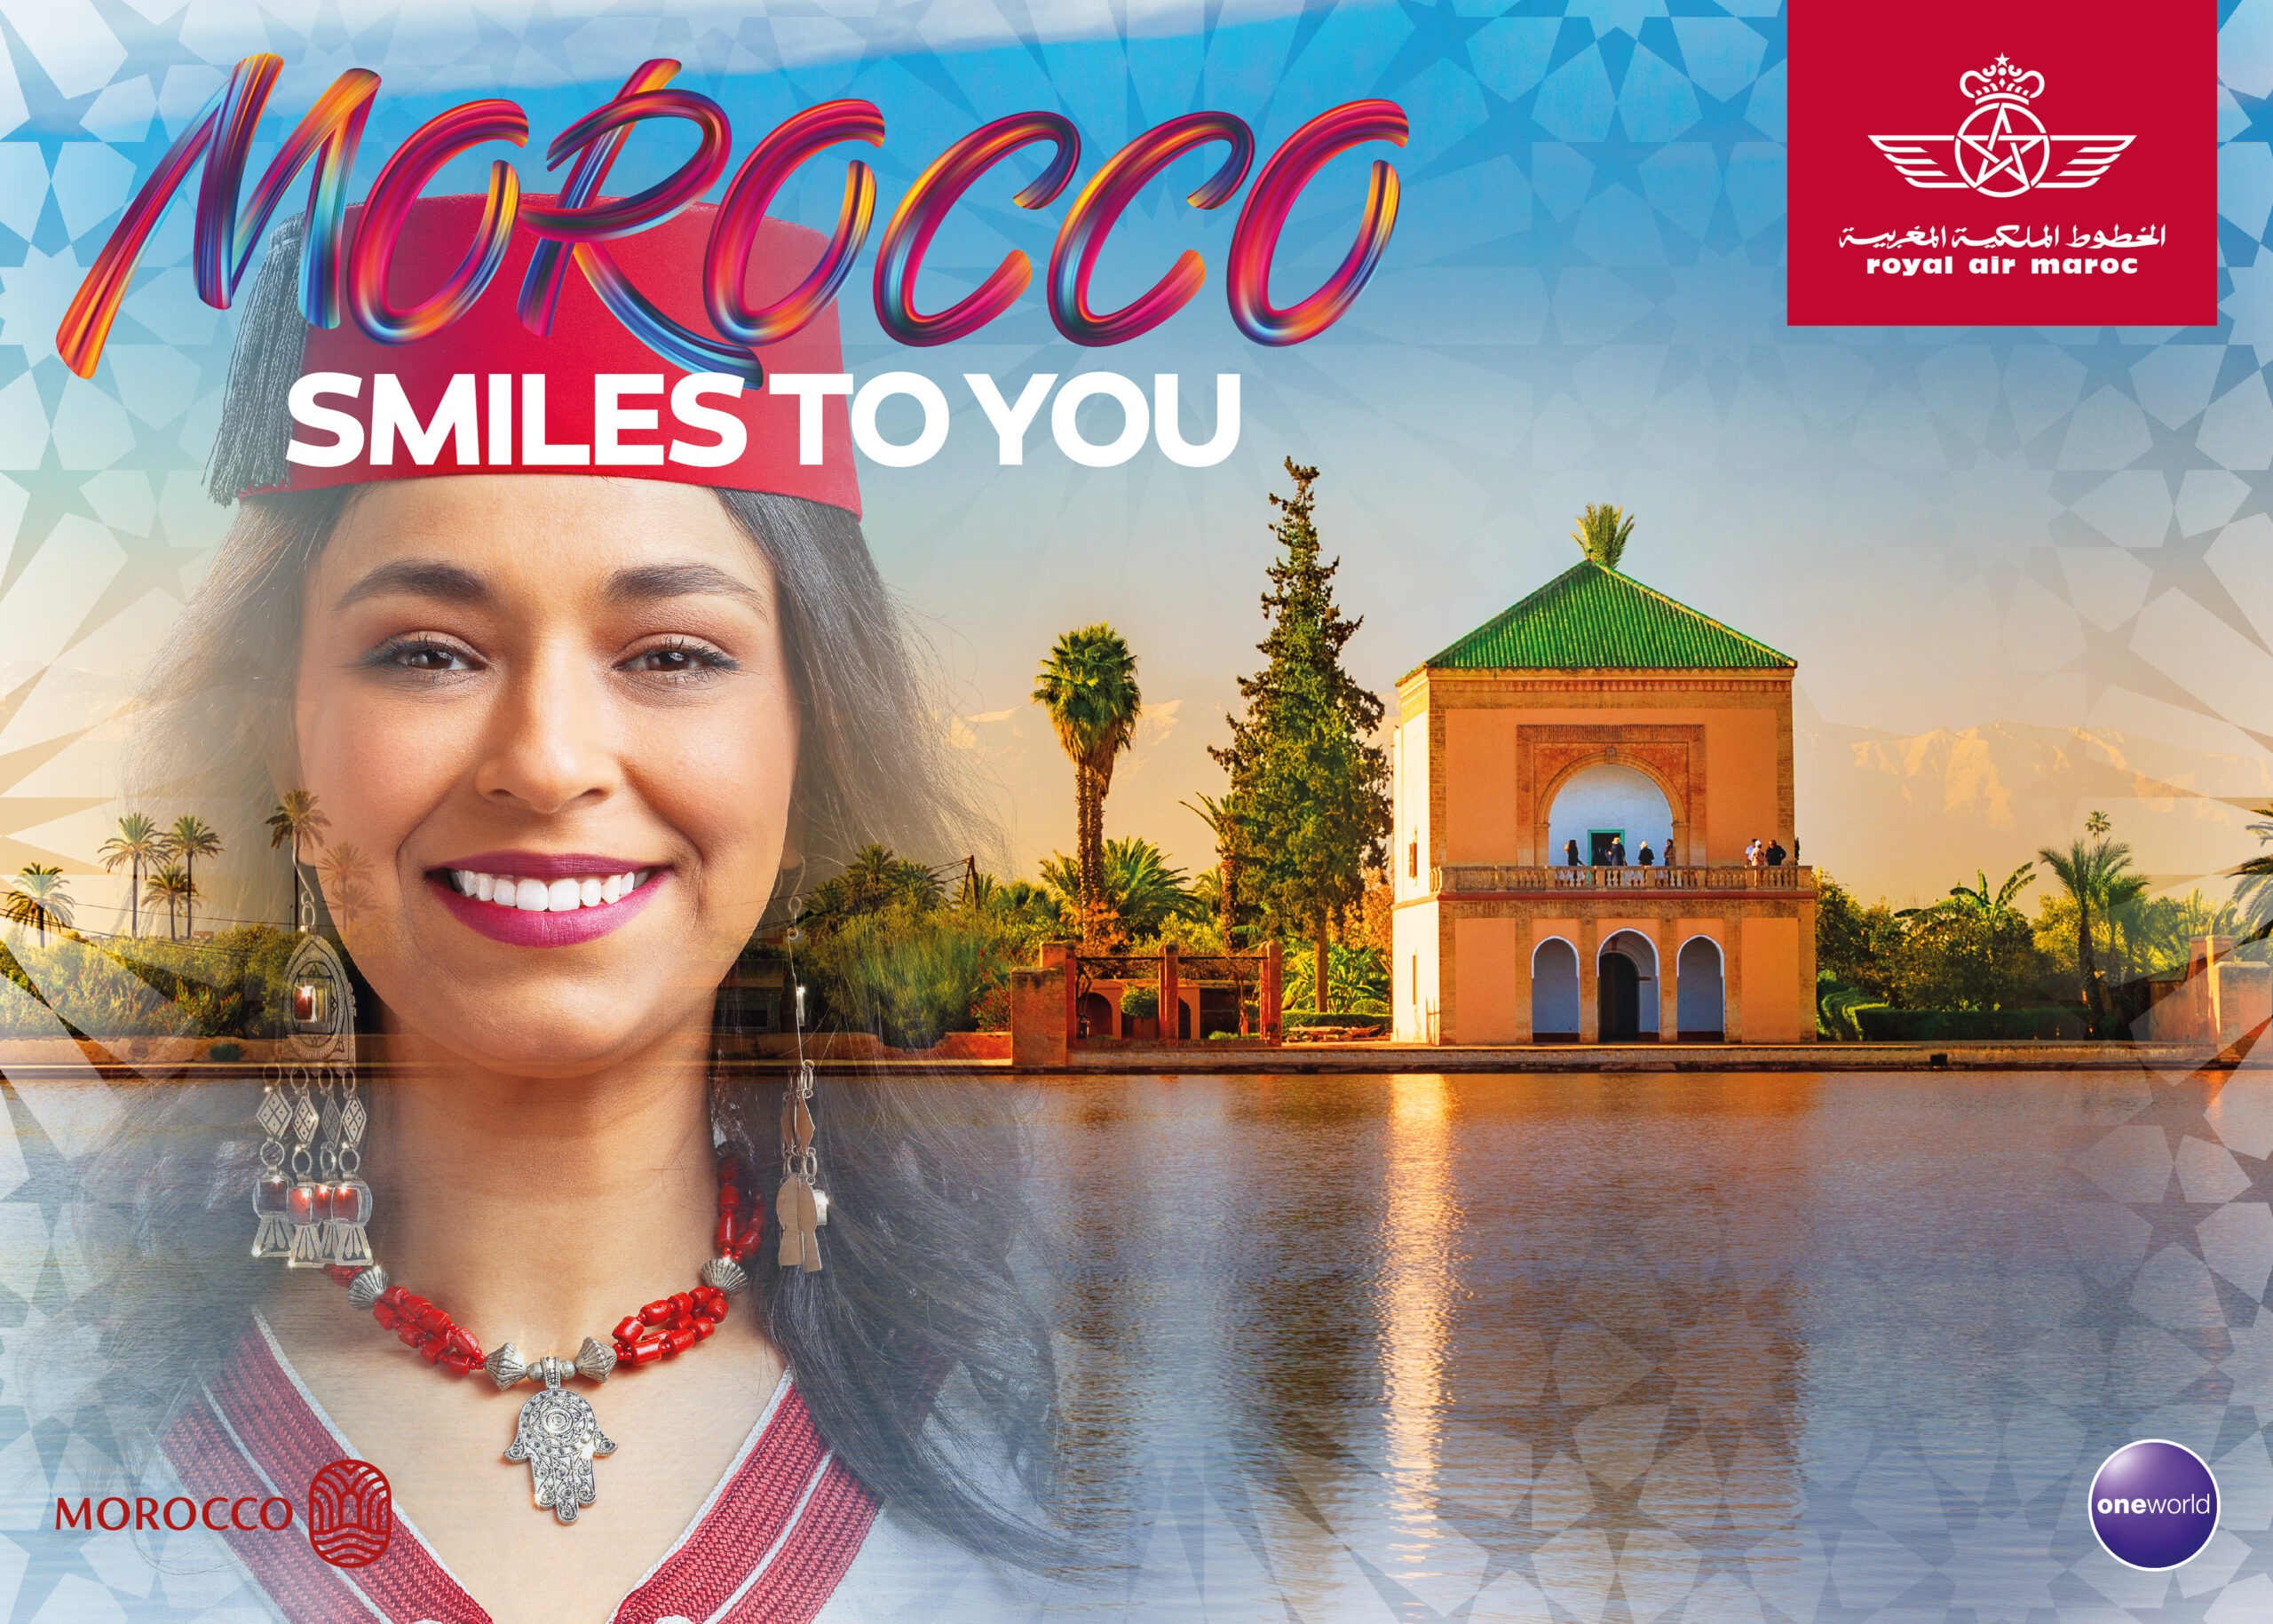 Morocco Smiles to You by RAM